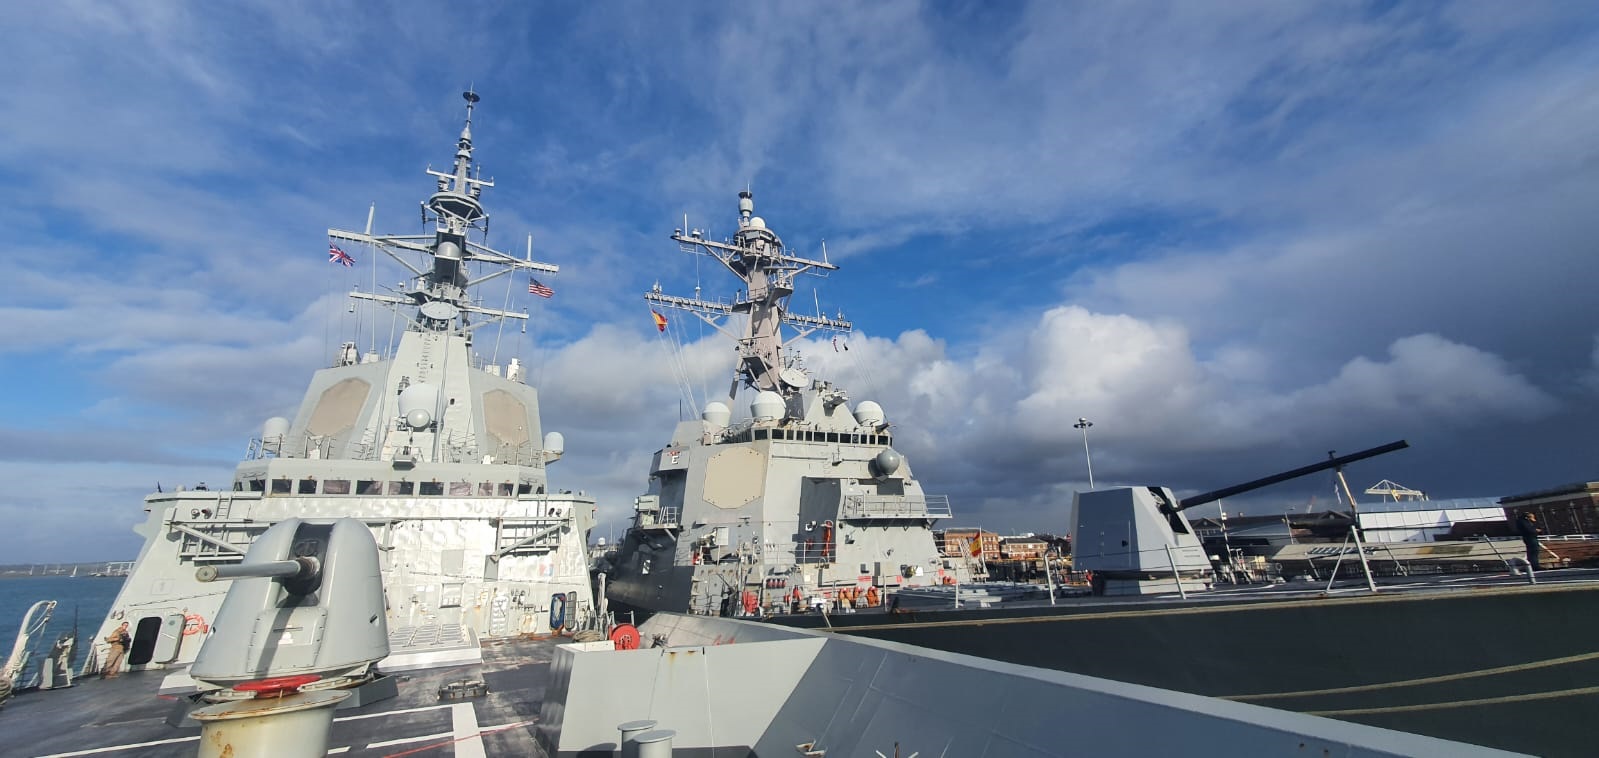 The frigate and the aircraft carrier in port